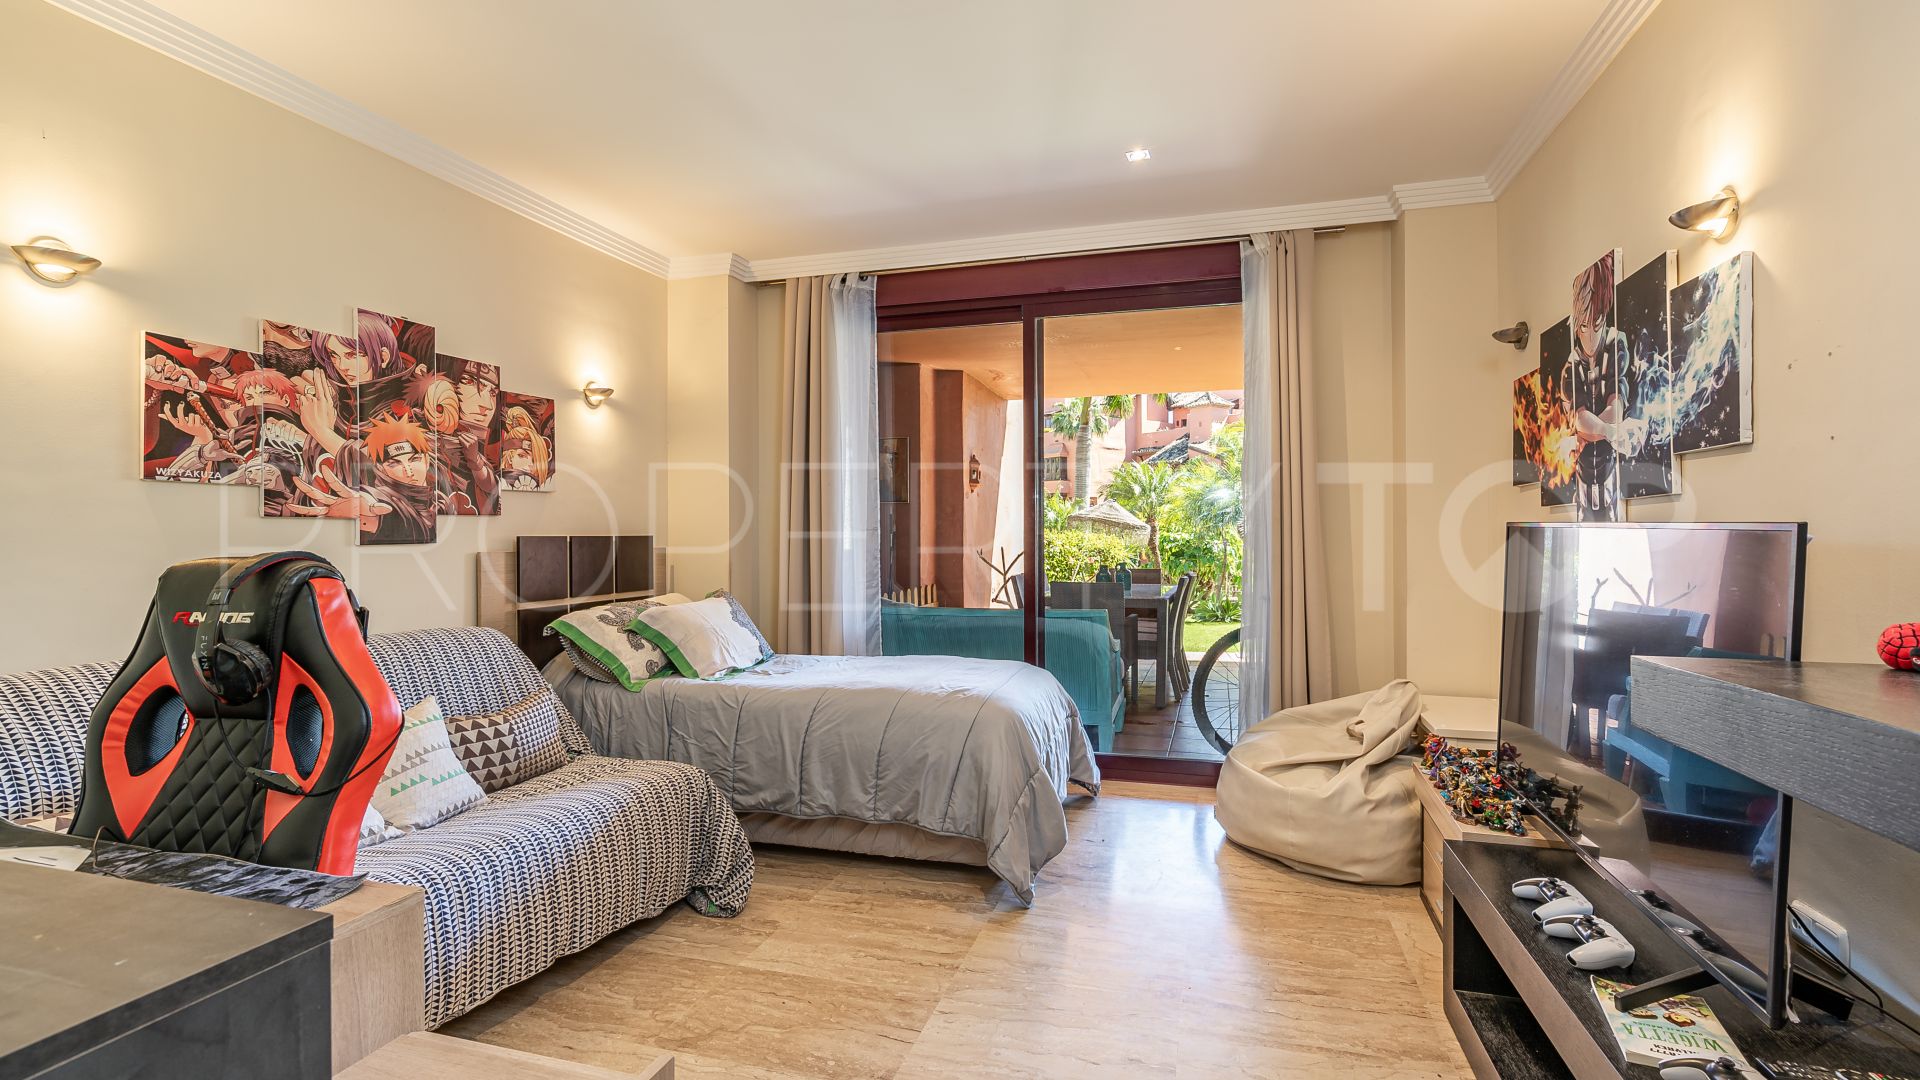 Ground floor apartment for sale in Las Nayades with 4 bedrooms